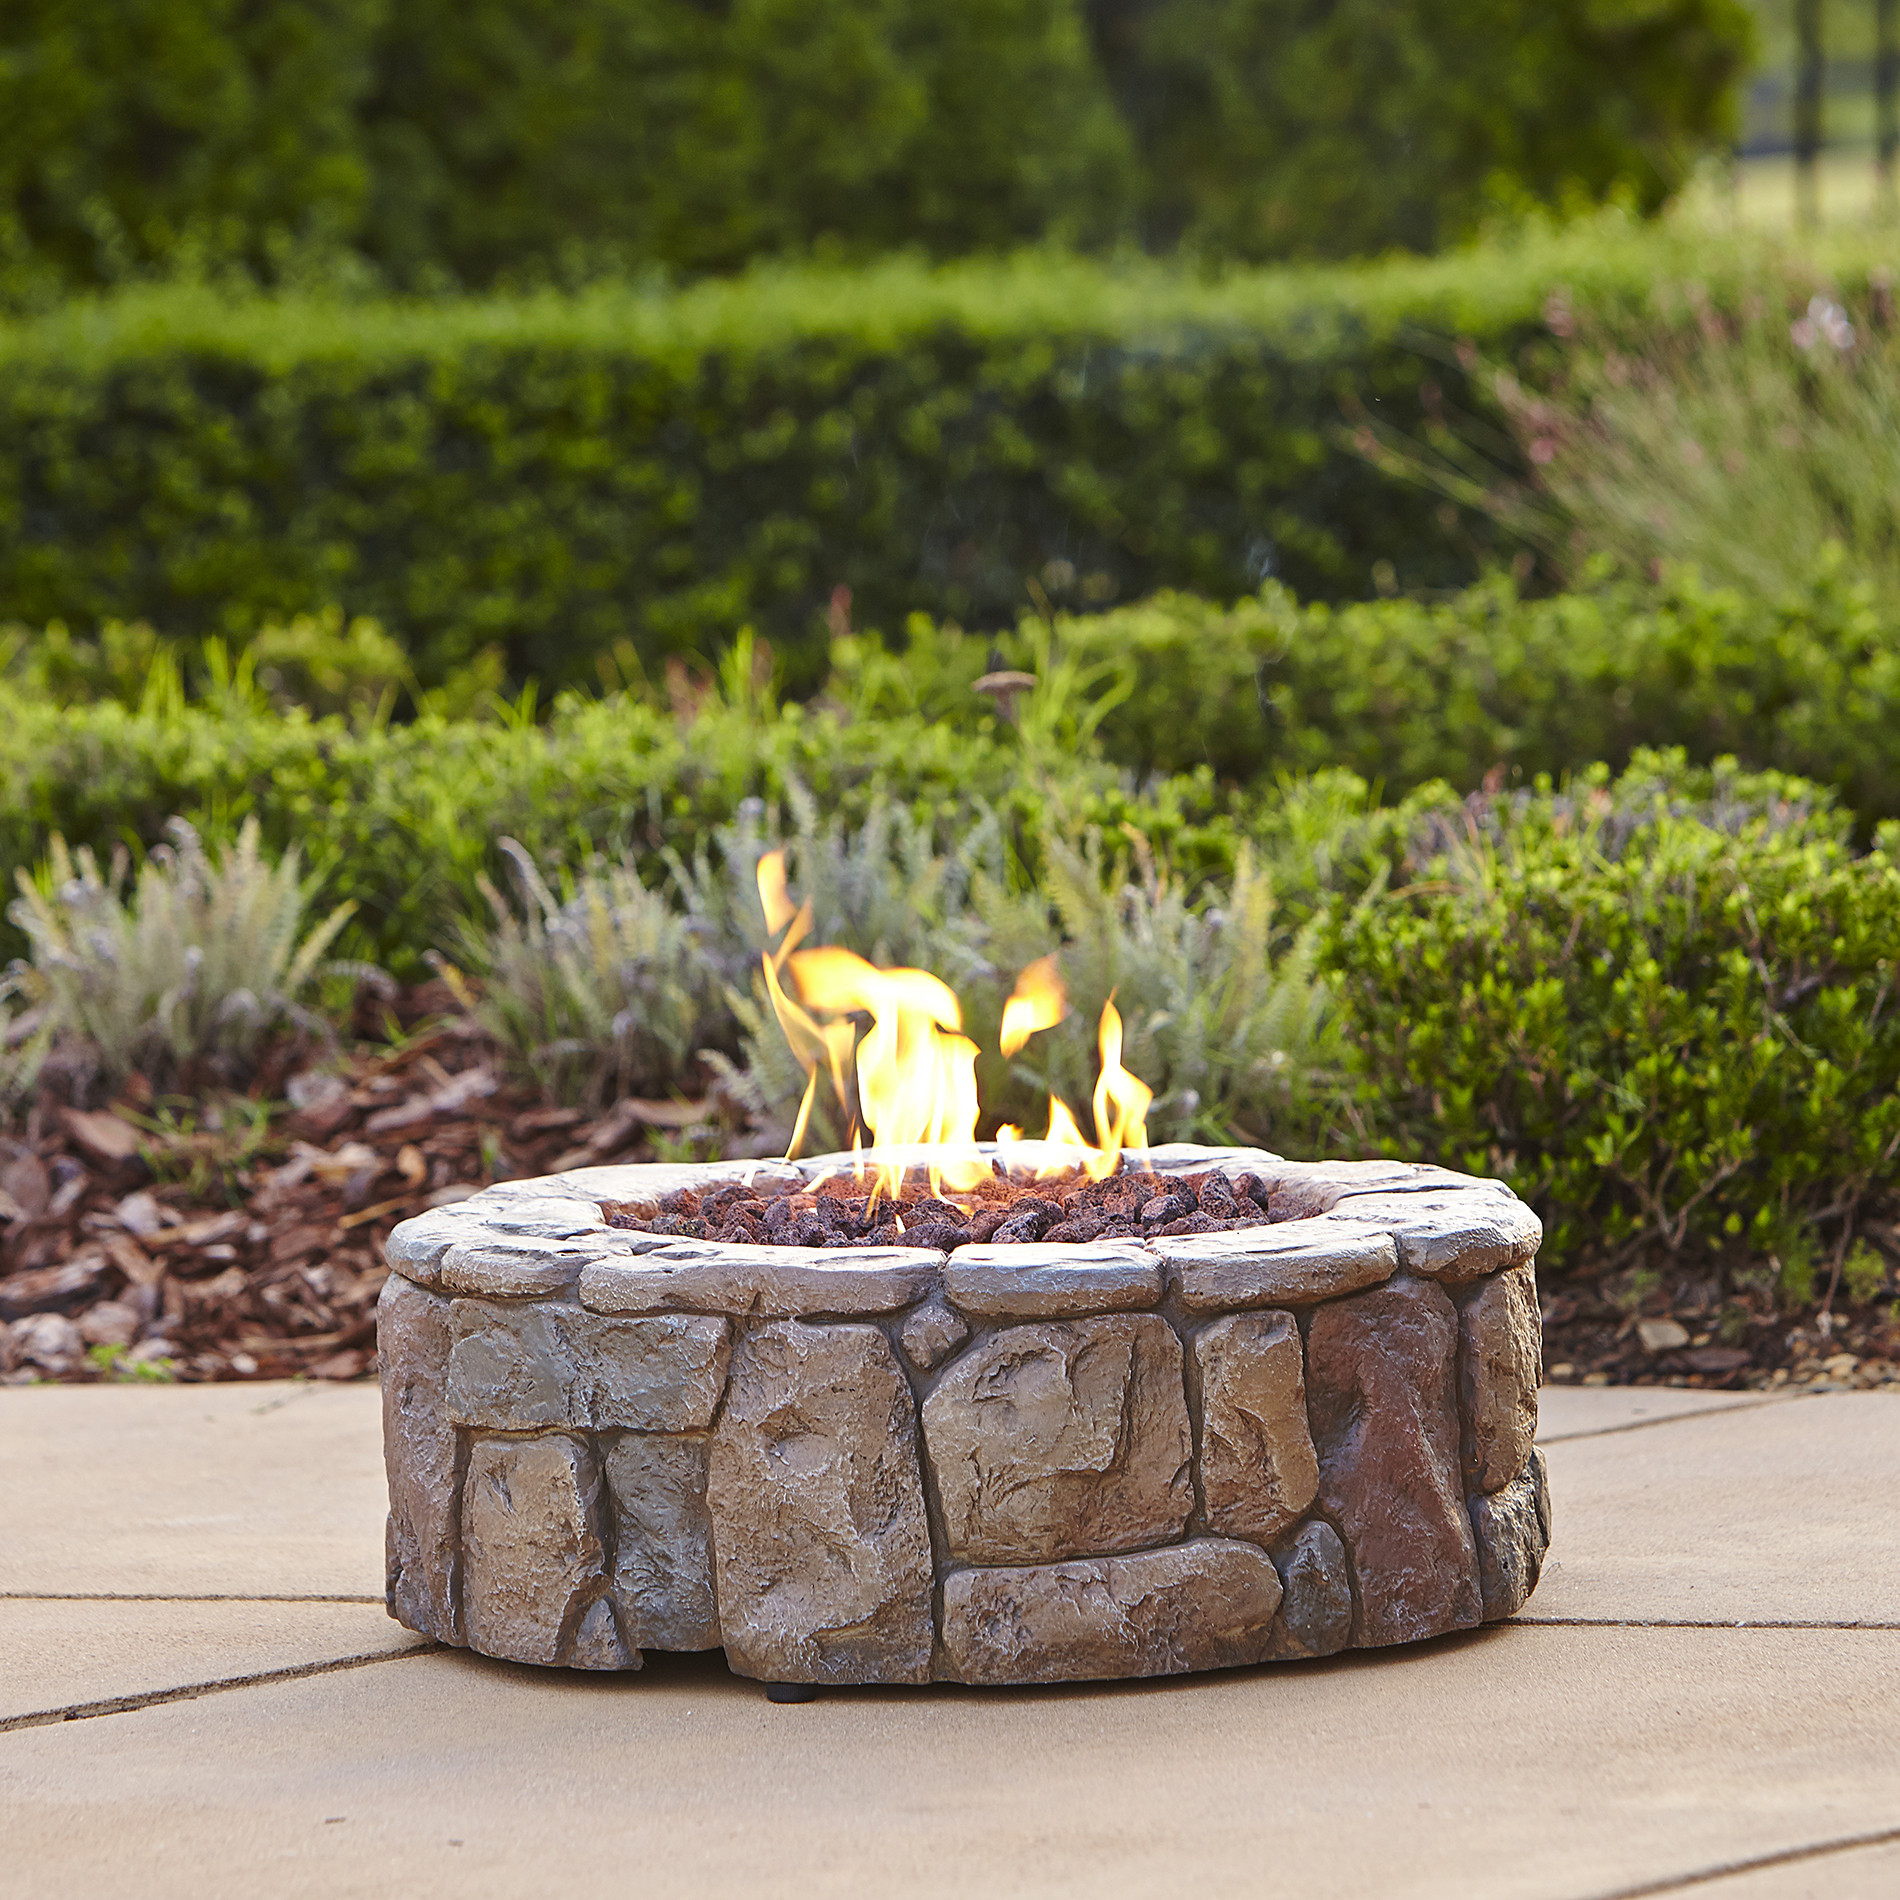 Gas Stone Fire Pit
 Garden Oasis Stone Look Gas Fire Pit 28"